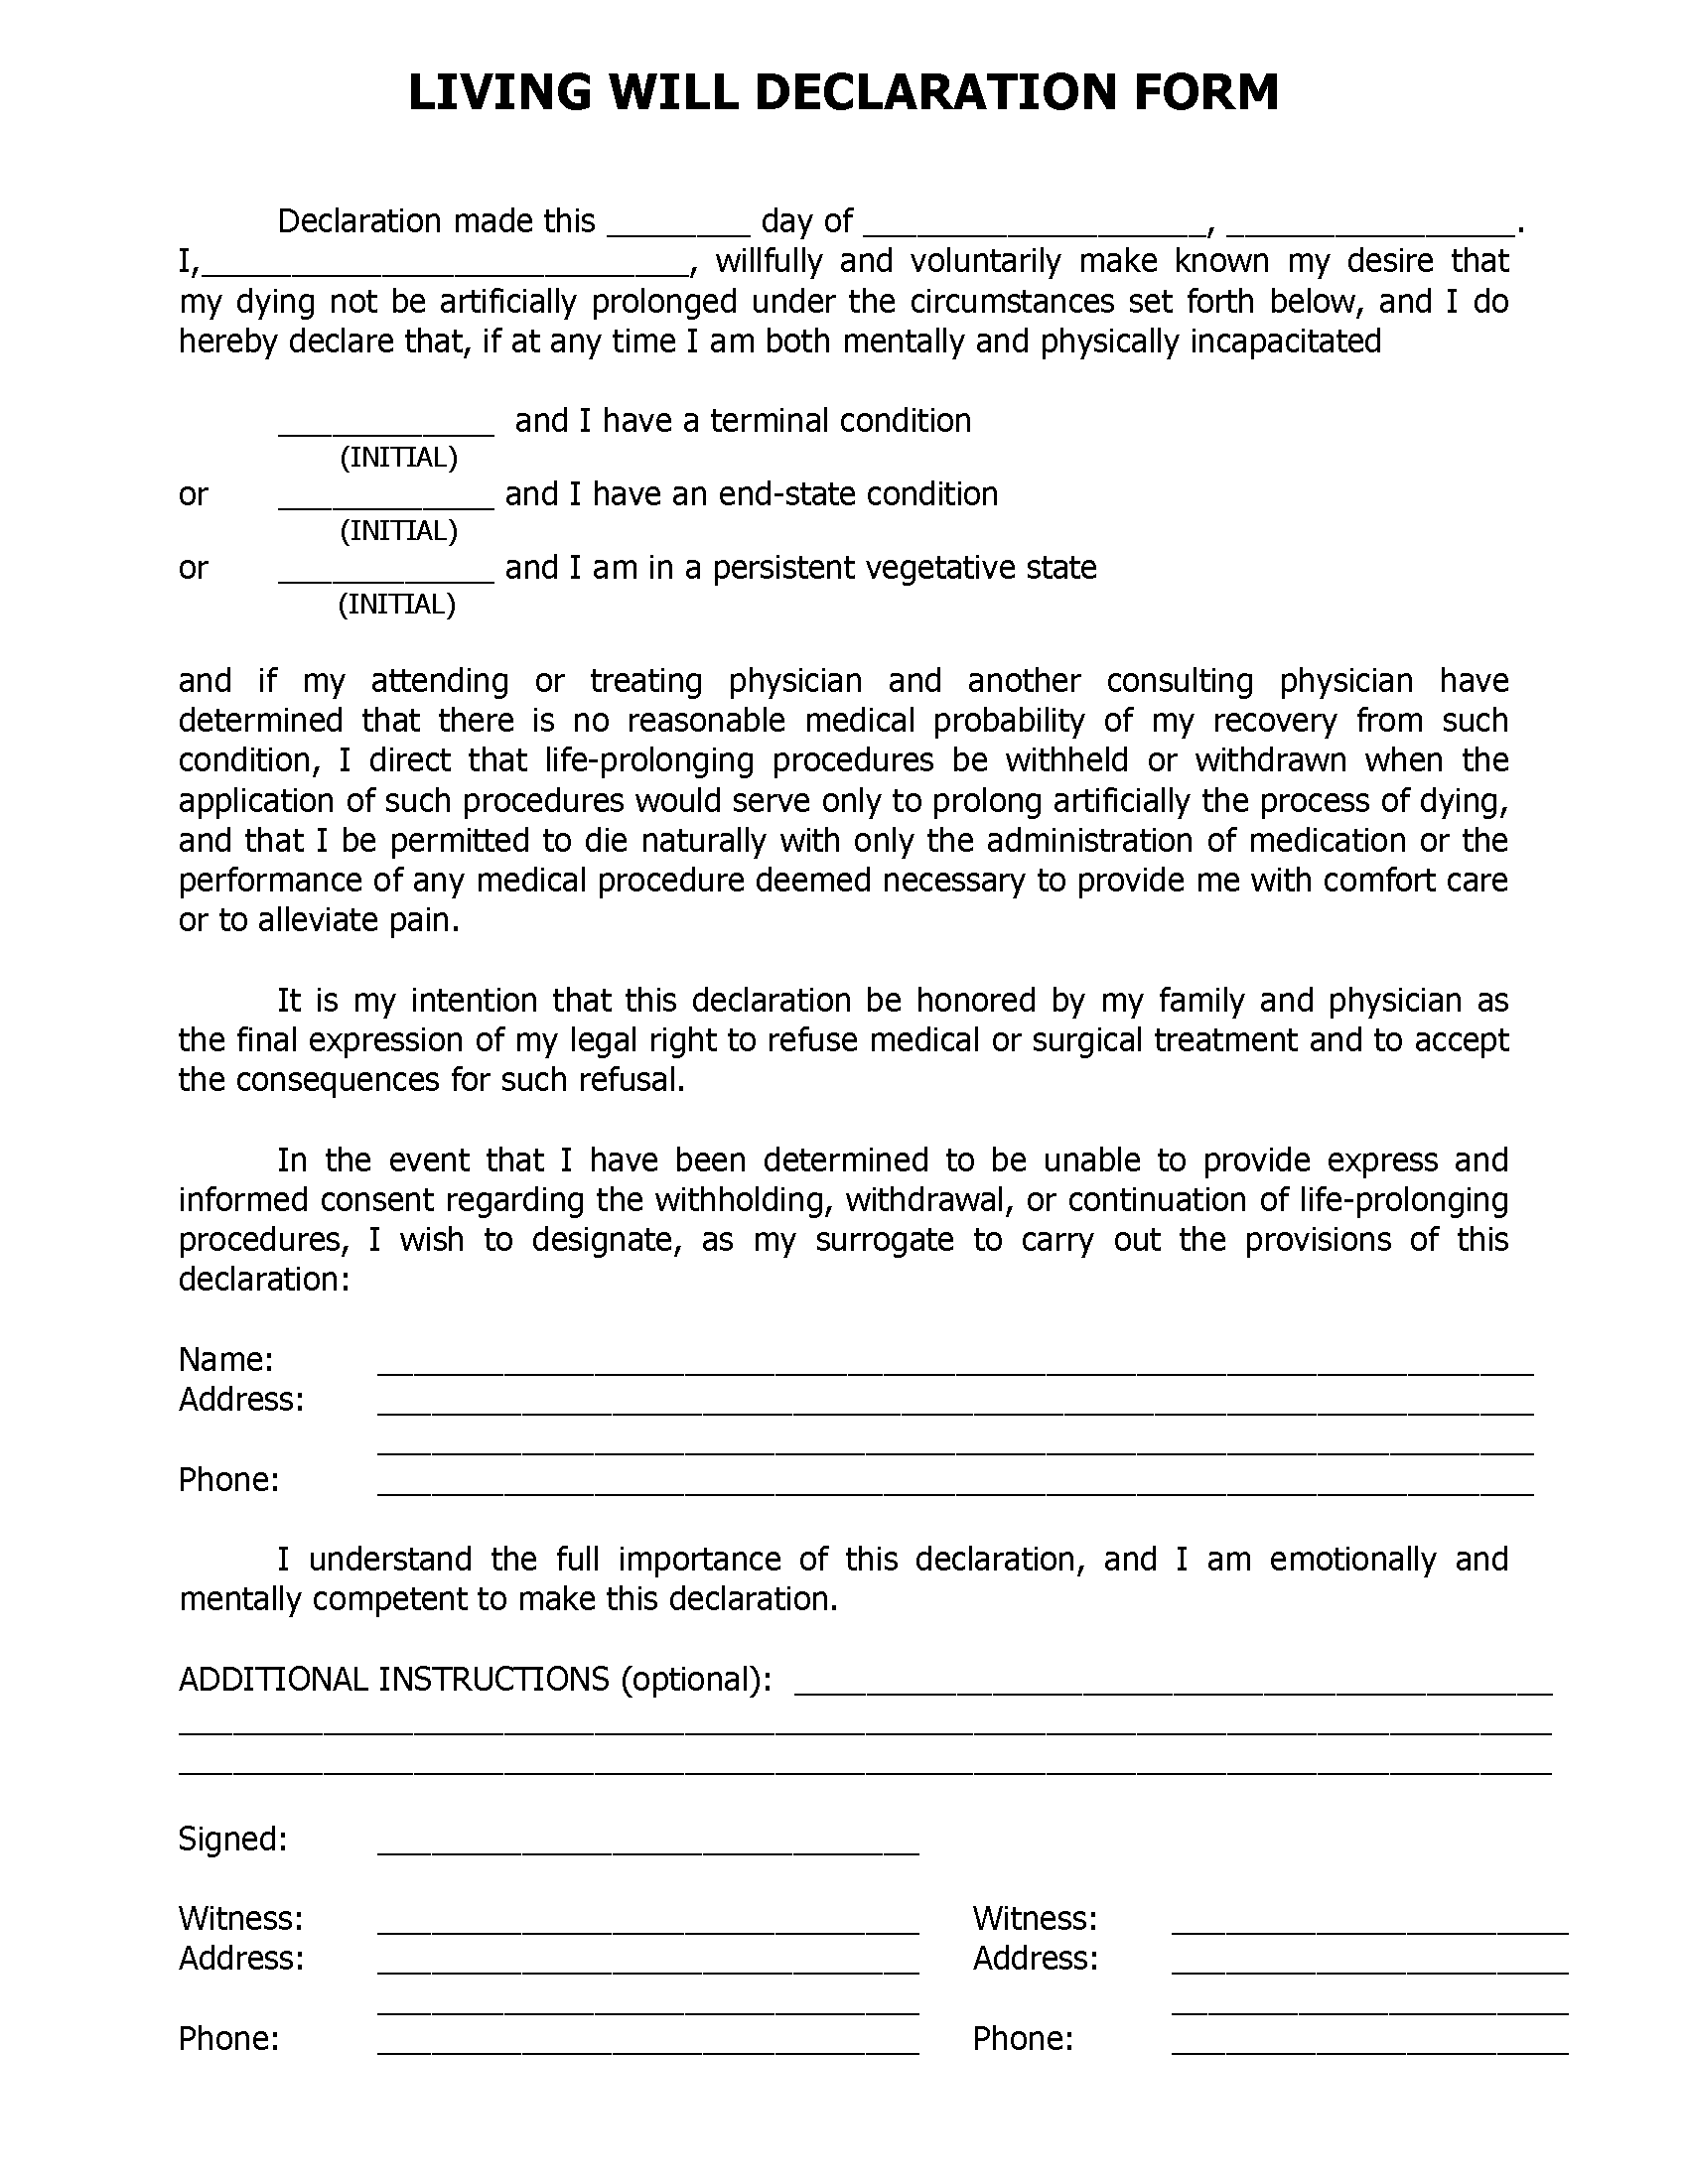 florida-living-will-form-free-printable-legal-forms